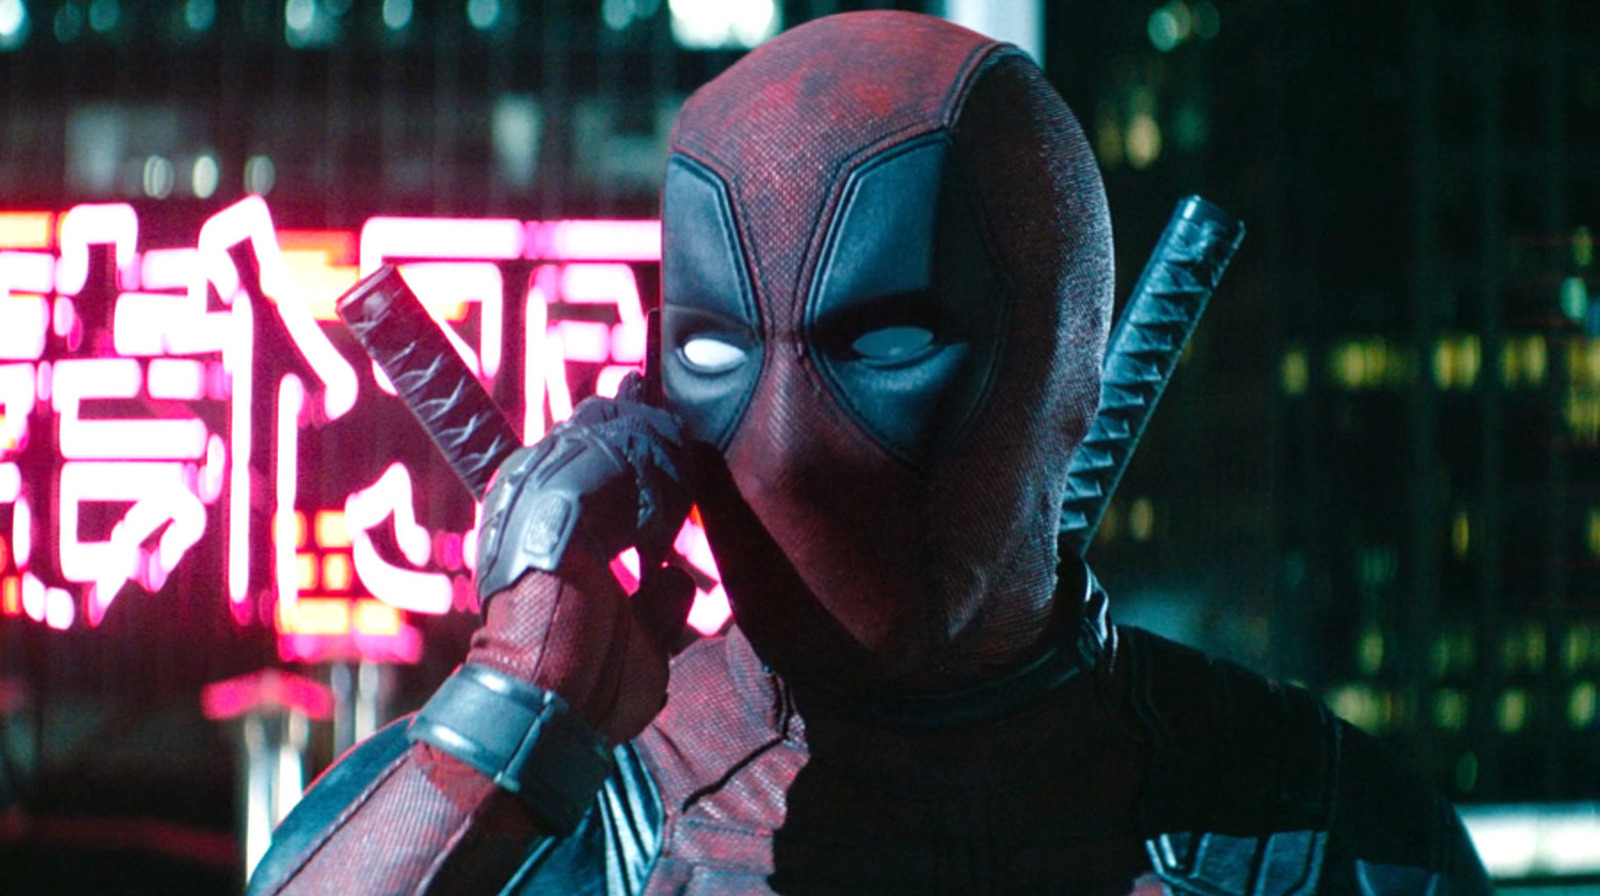 Unveiled: The Marvel Movie That Almost Made Deadpool the Villain – Find Out Which One!